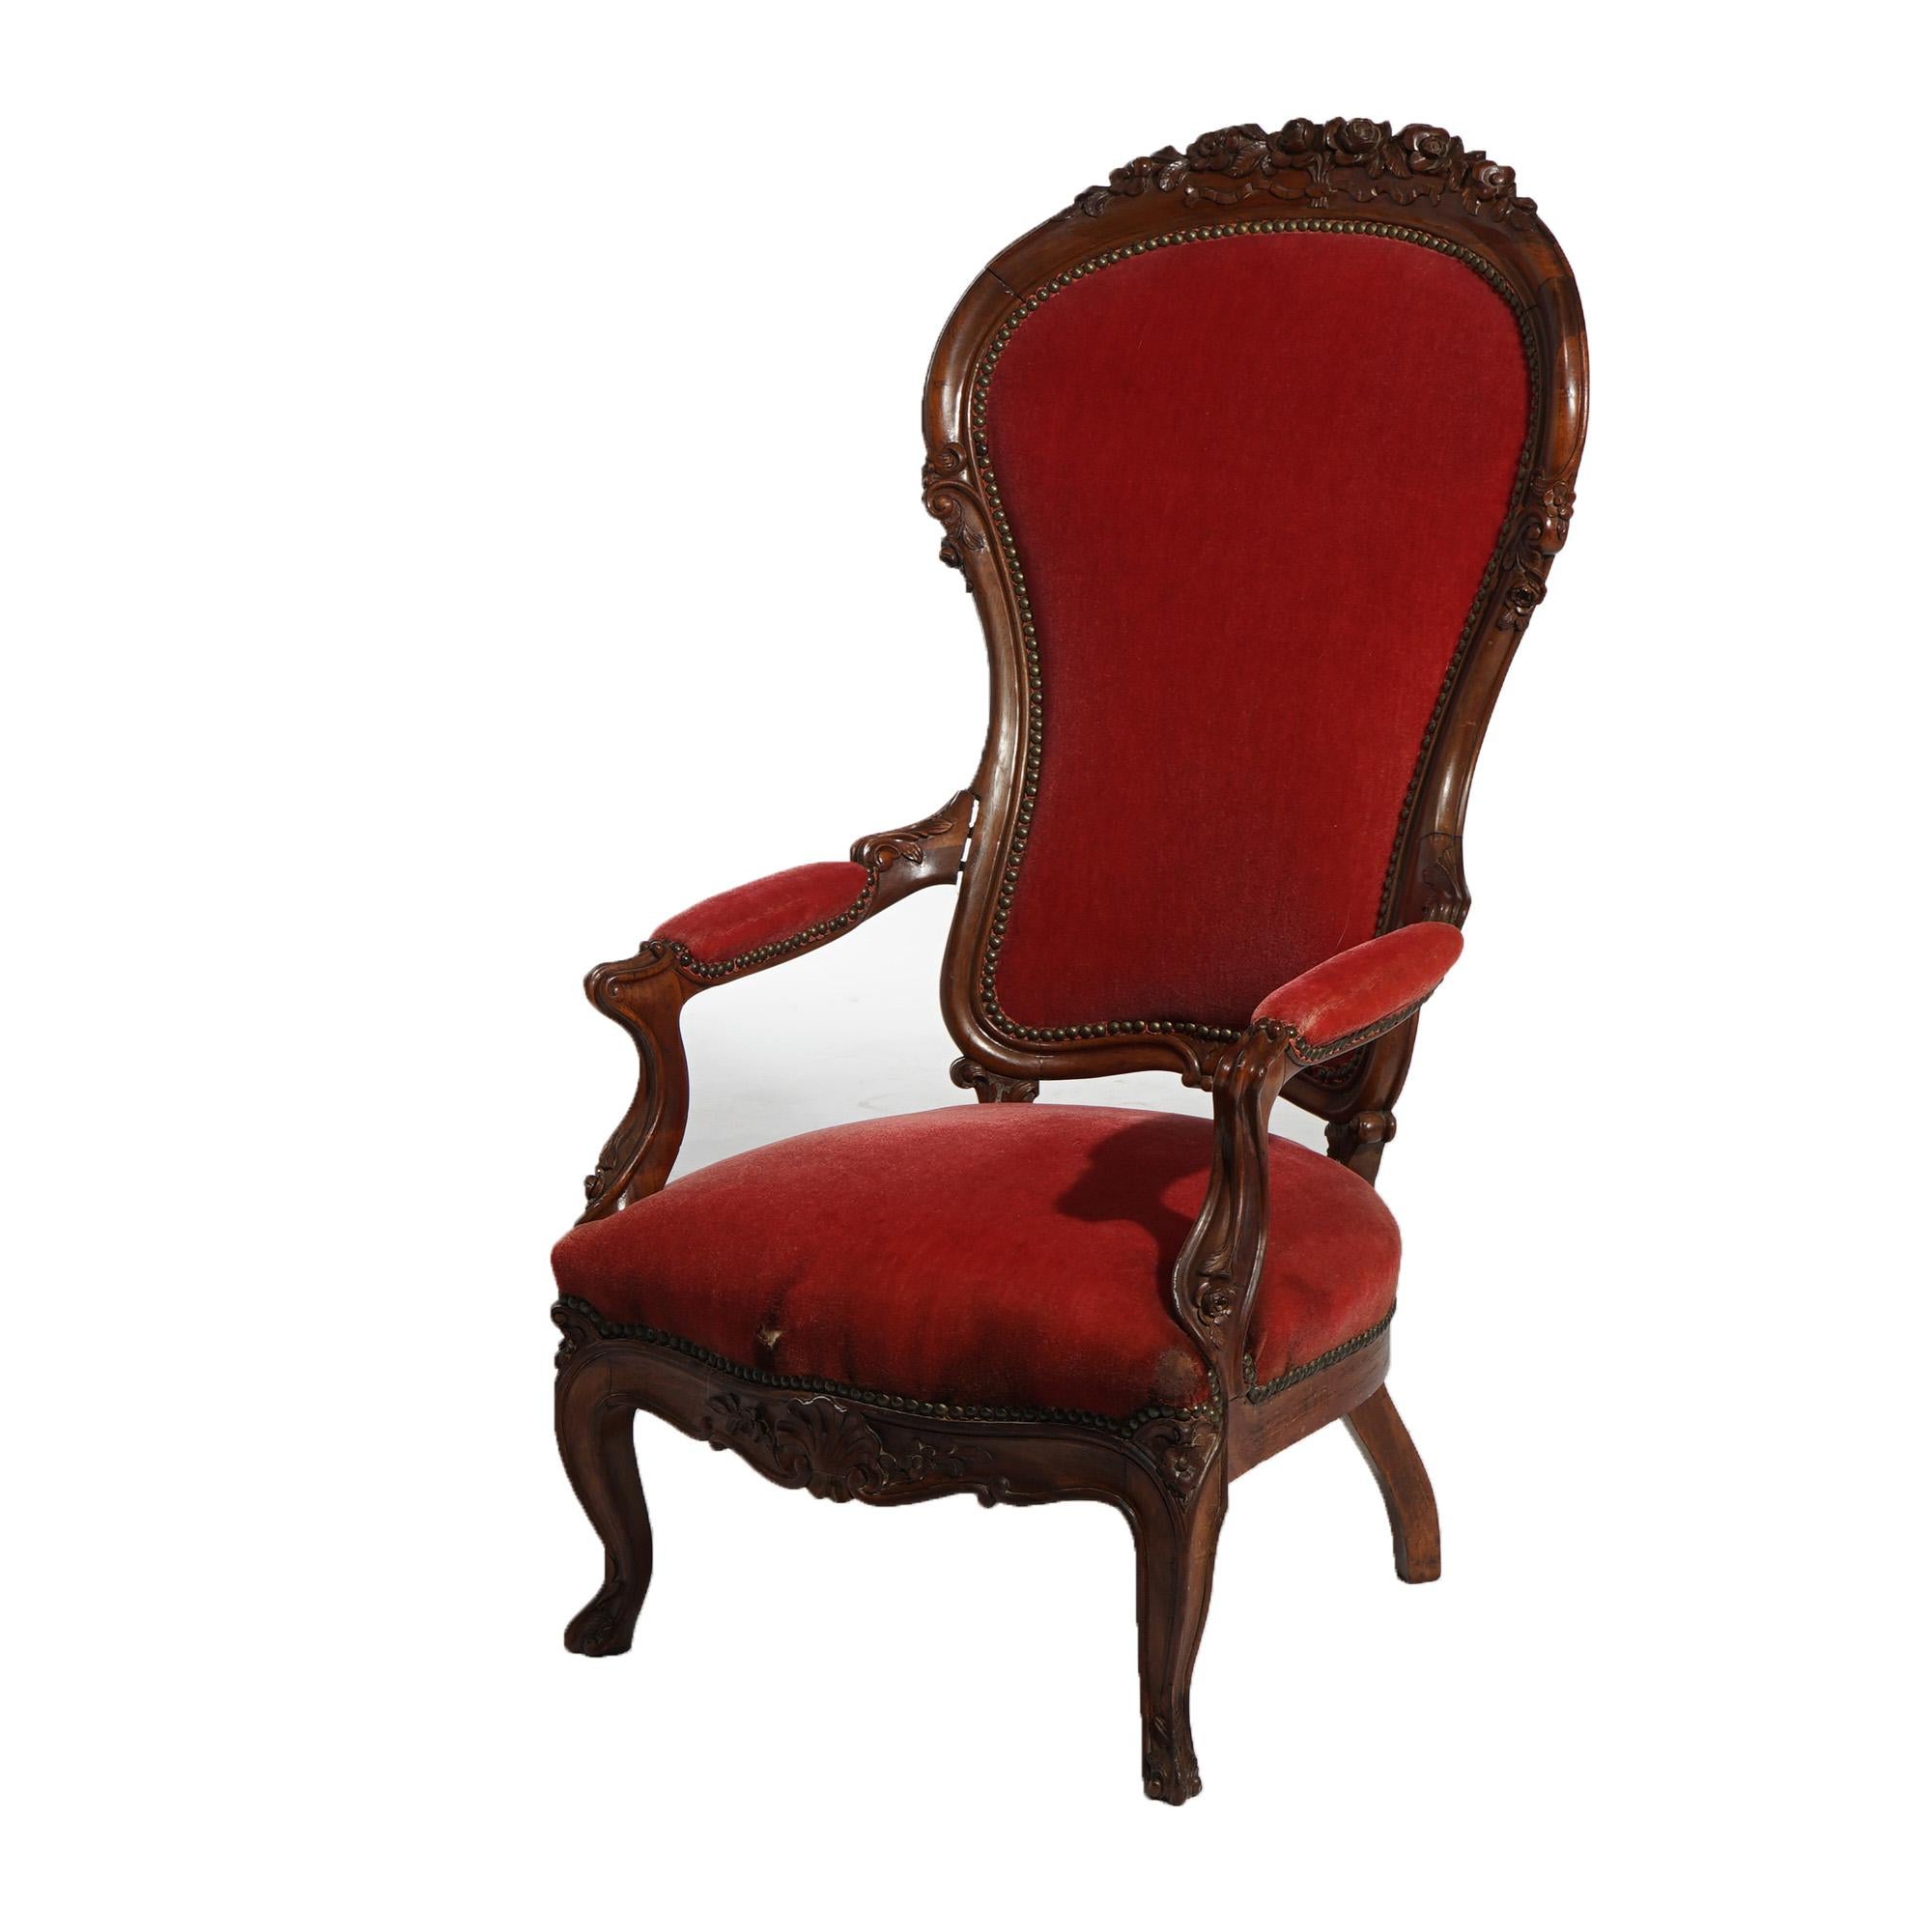 An antique Victorian parlor chair offers oversized walnut frame with foliate carved crest, upholstered seta and back, and raised on cabriole legs, c1890

Measures - 47